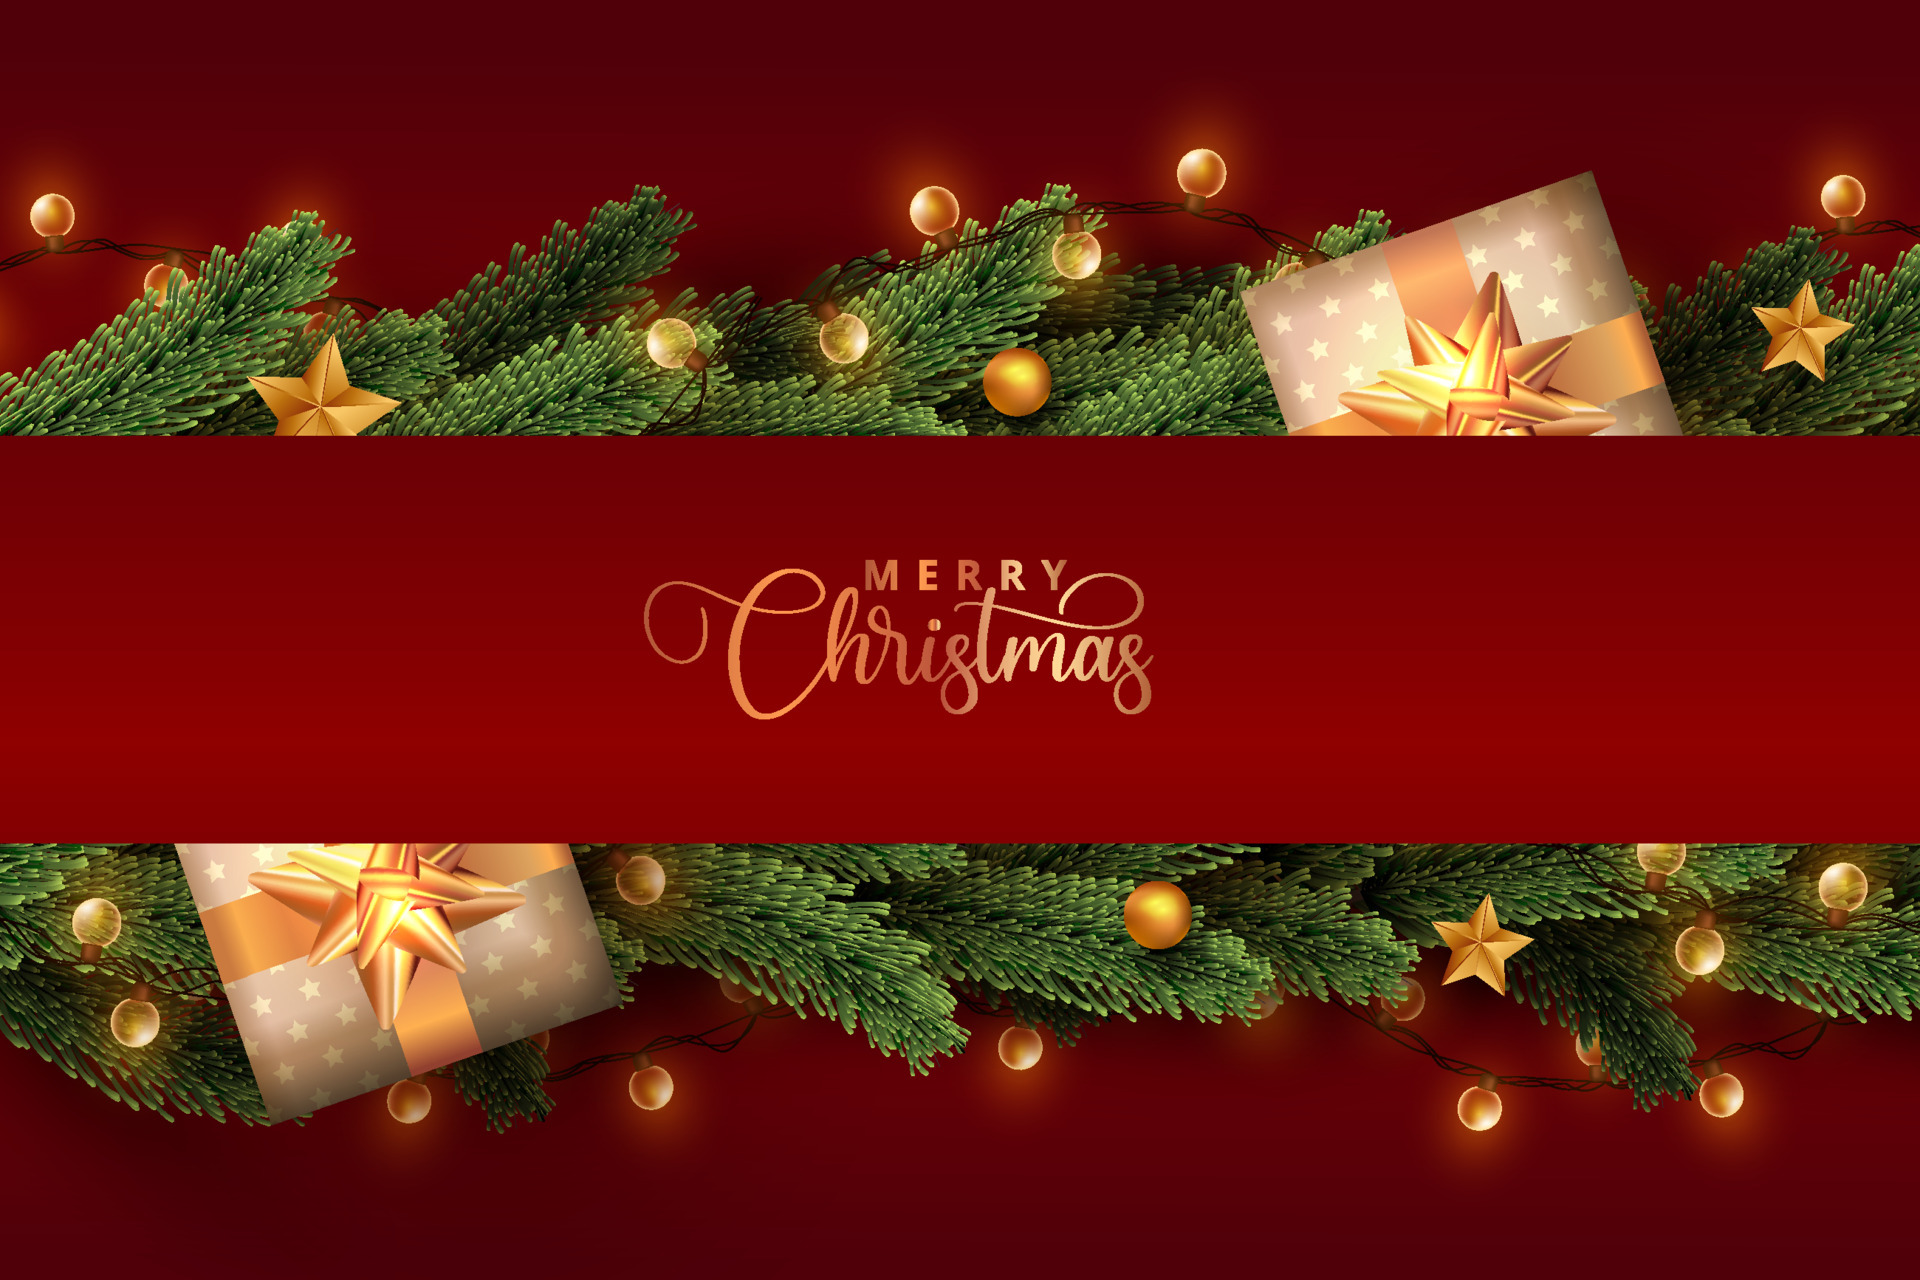 Shiny christmas lights wrapped in realistic pine tree leaves and gift boxes on red background. Merry christmas concept design